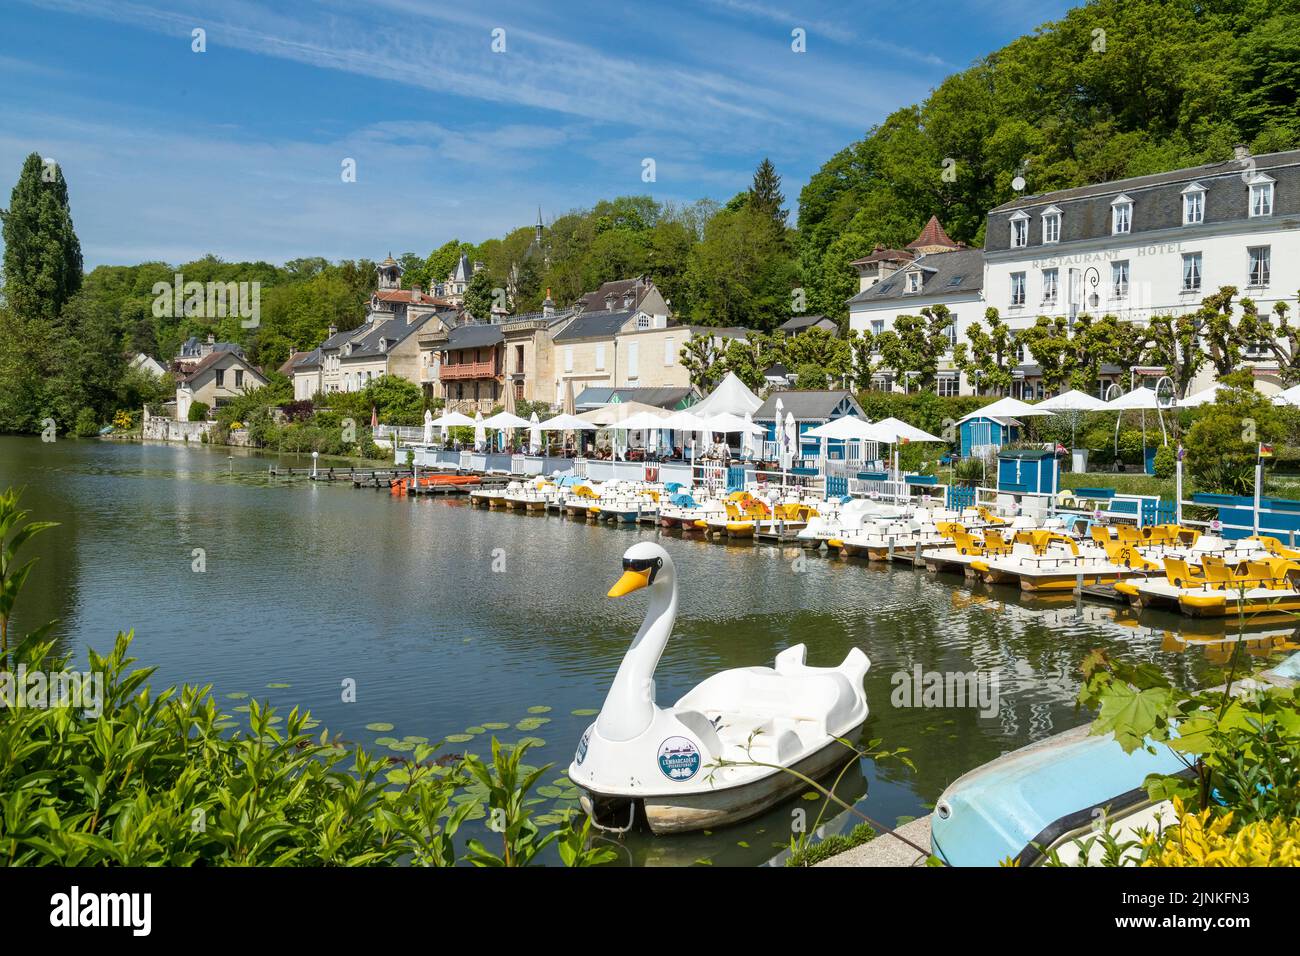 France, Oise, Picardie, Pierrefonds, Pierrefonds lake with coffee terrace and pedal boats rental // France, Oise (60), Picardie, Pierrefonds, lac de P Stock Photo